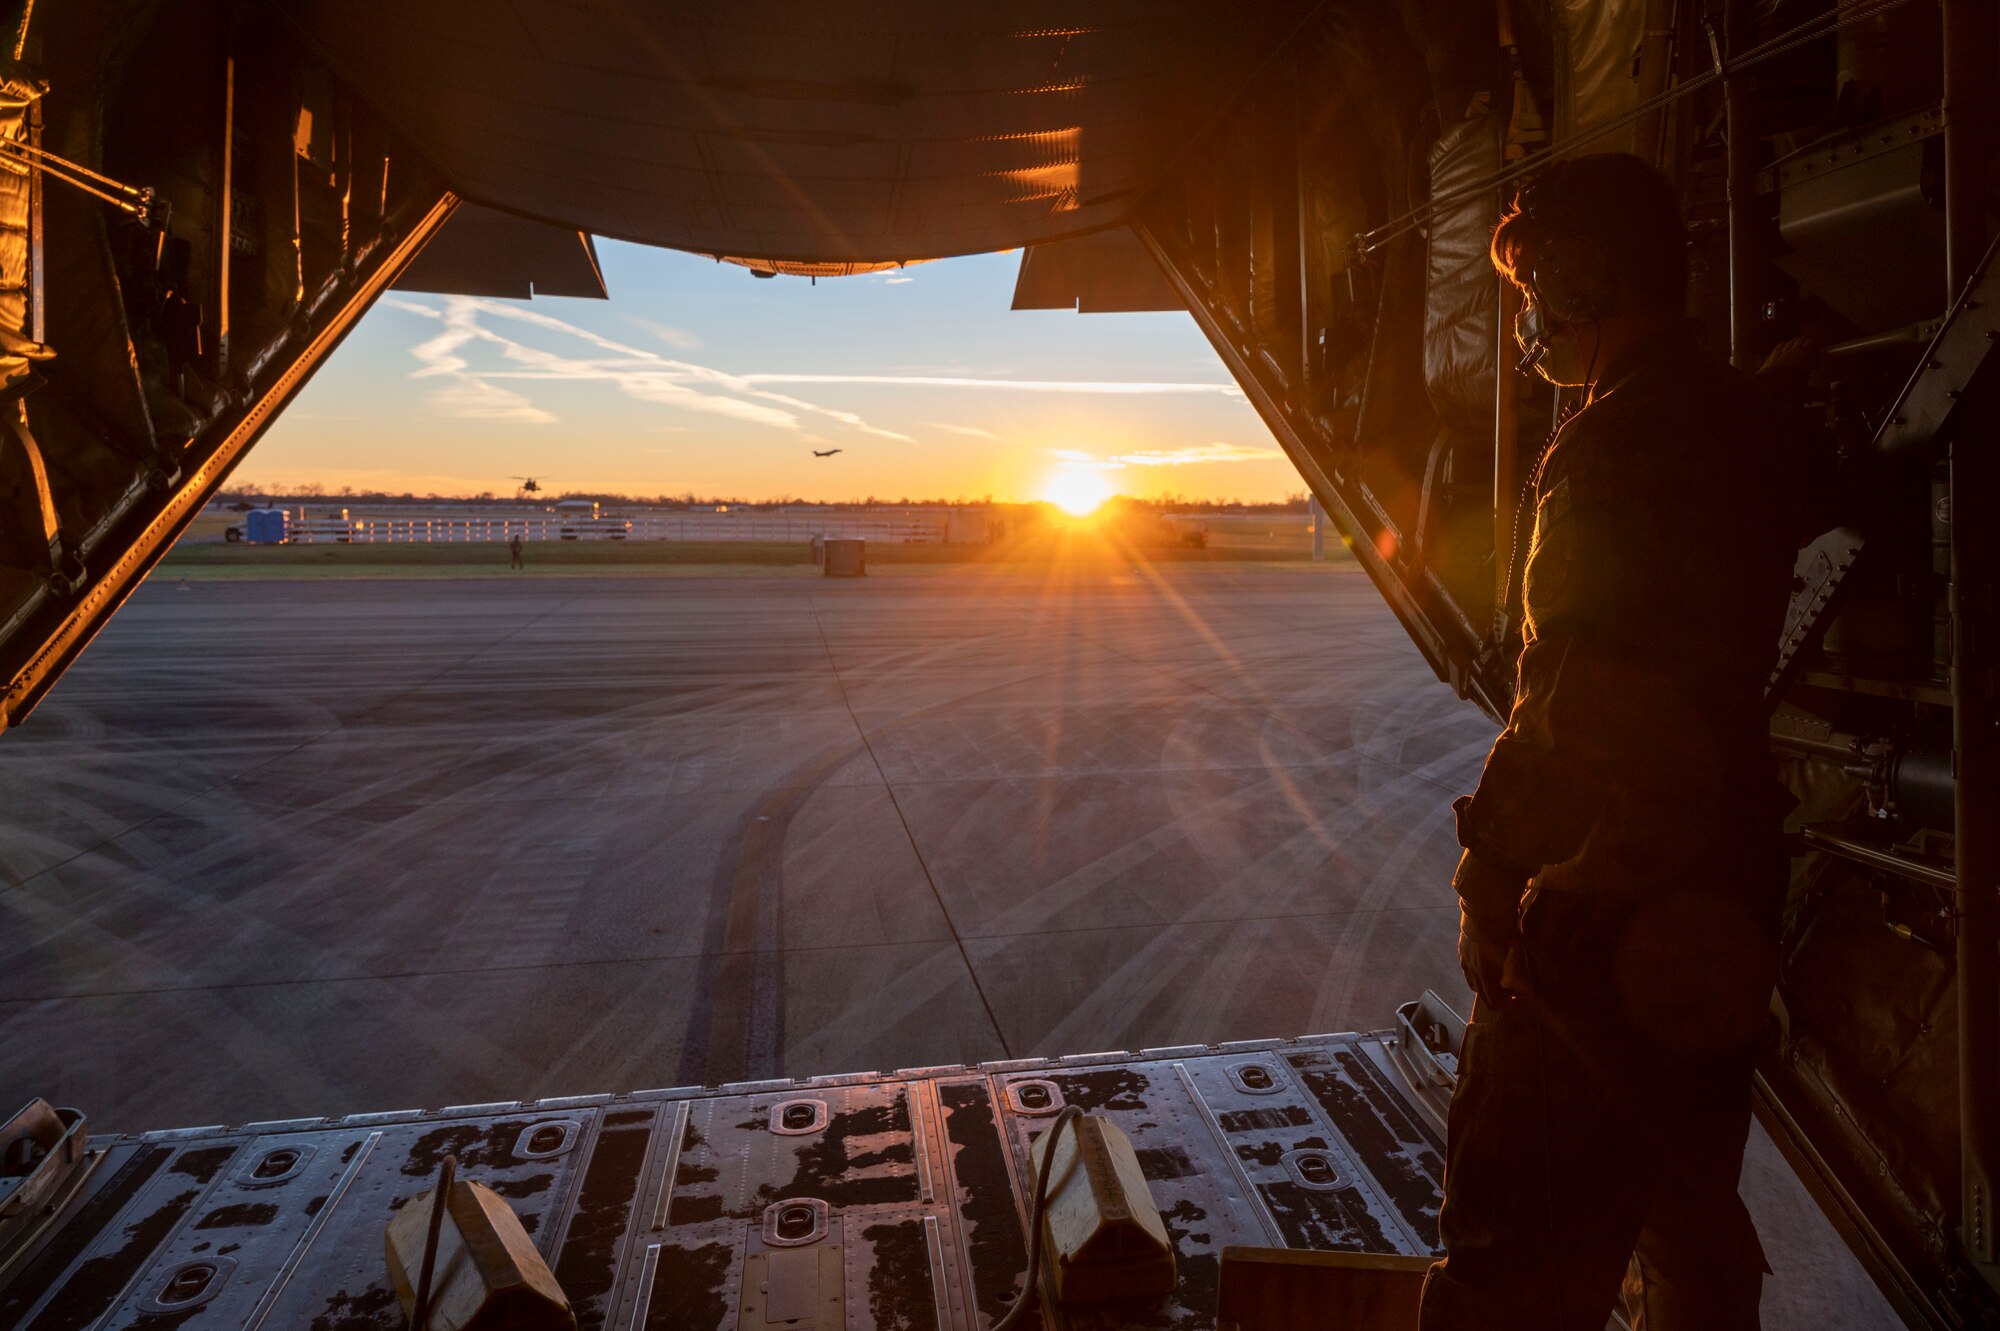 A loadmaster from the 317th Airlift Wing at Dyess Air Force Base, Texas, looks out the back of a C-130J Super Hercules